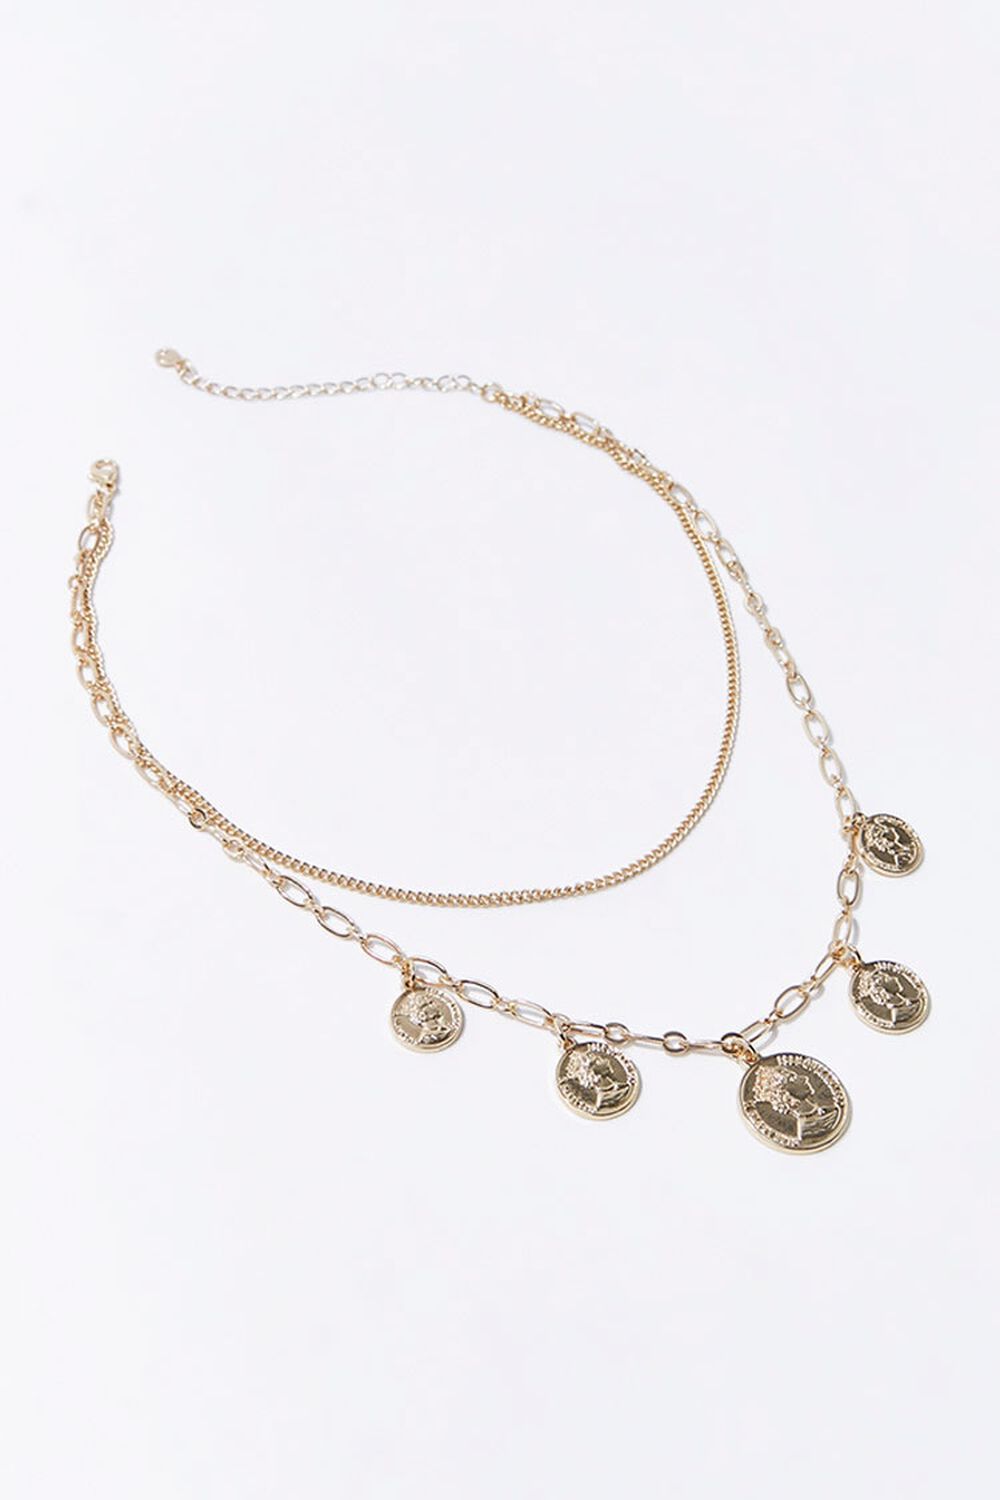 GOLD Sustainable Coin Necklace Set, image 2